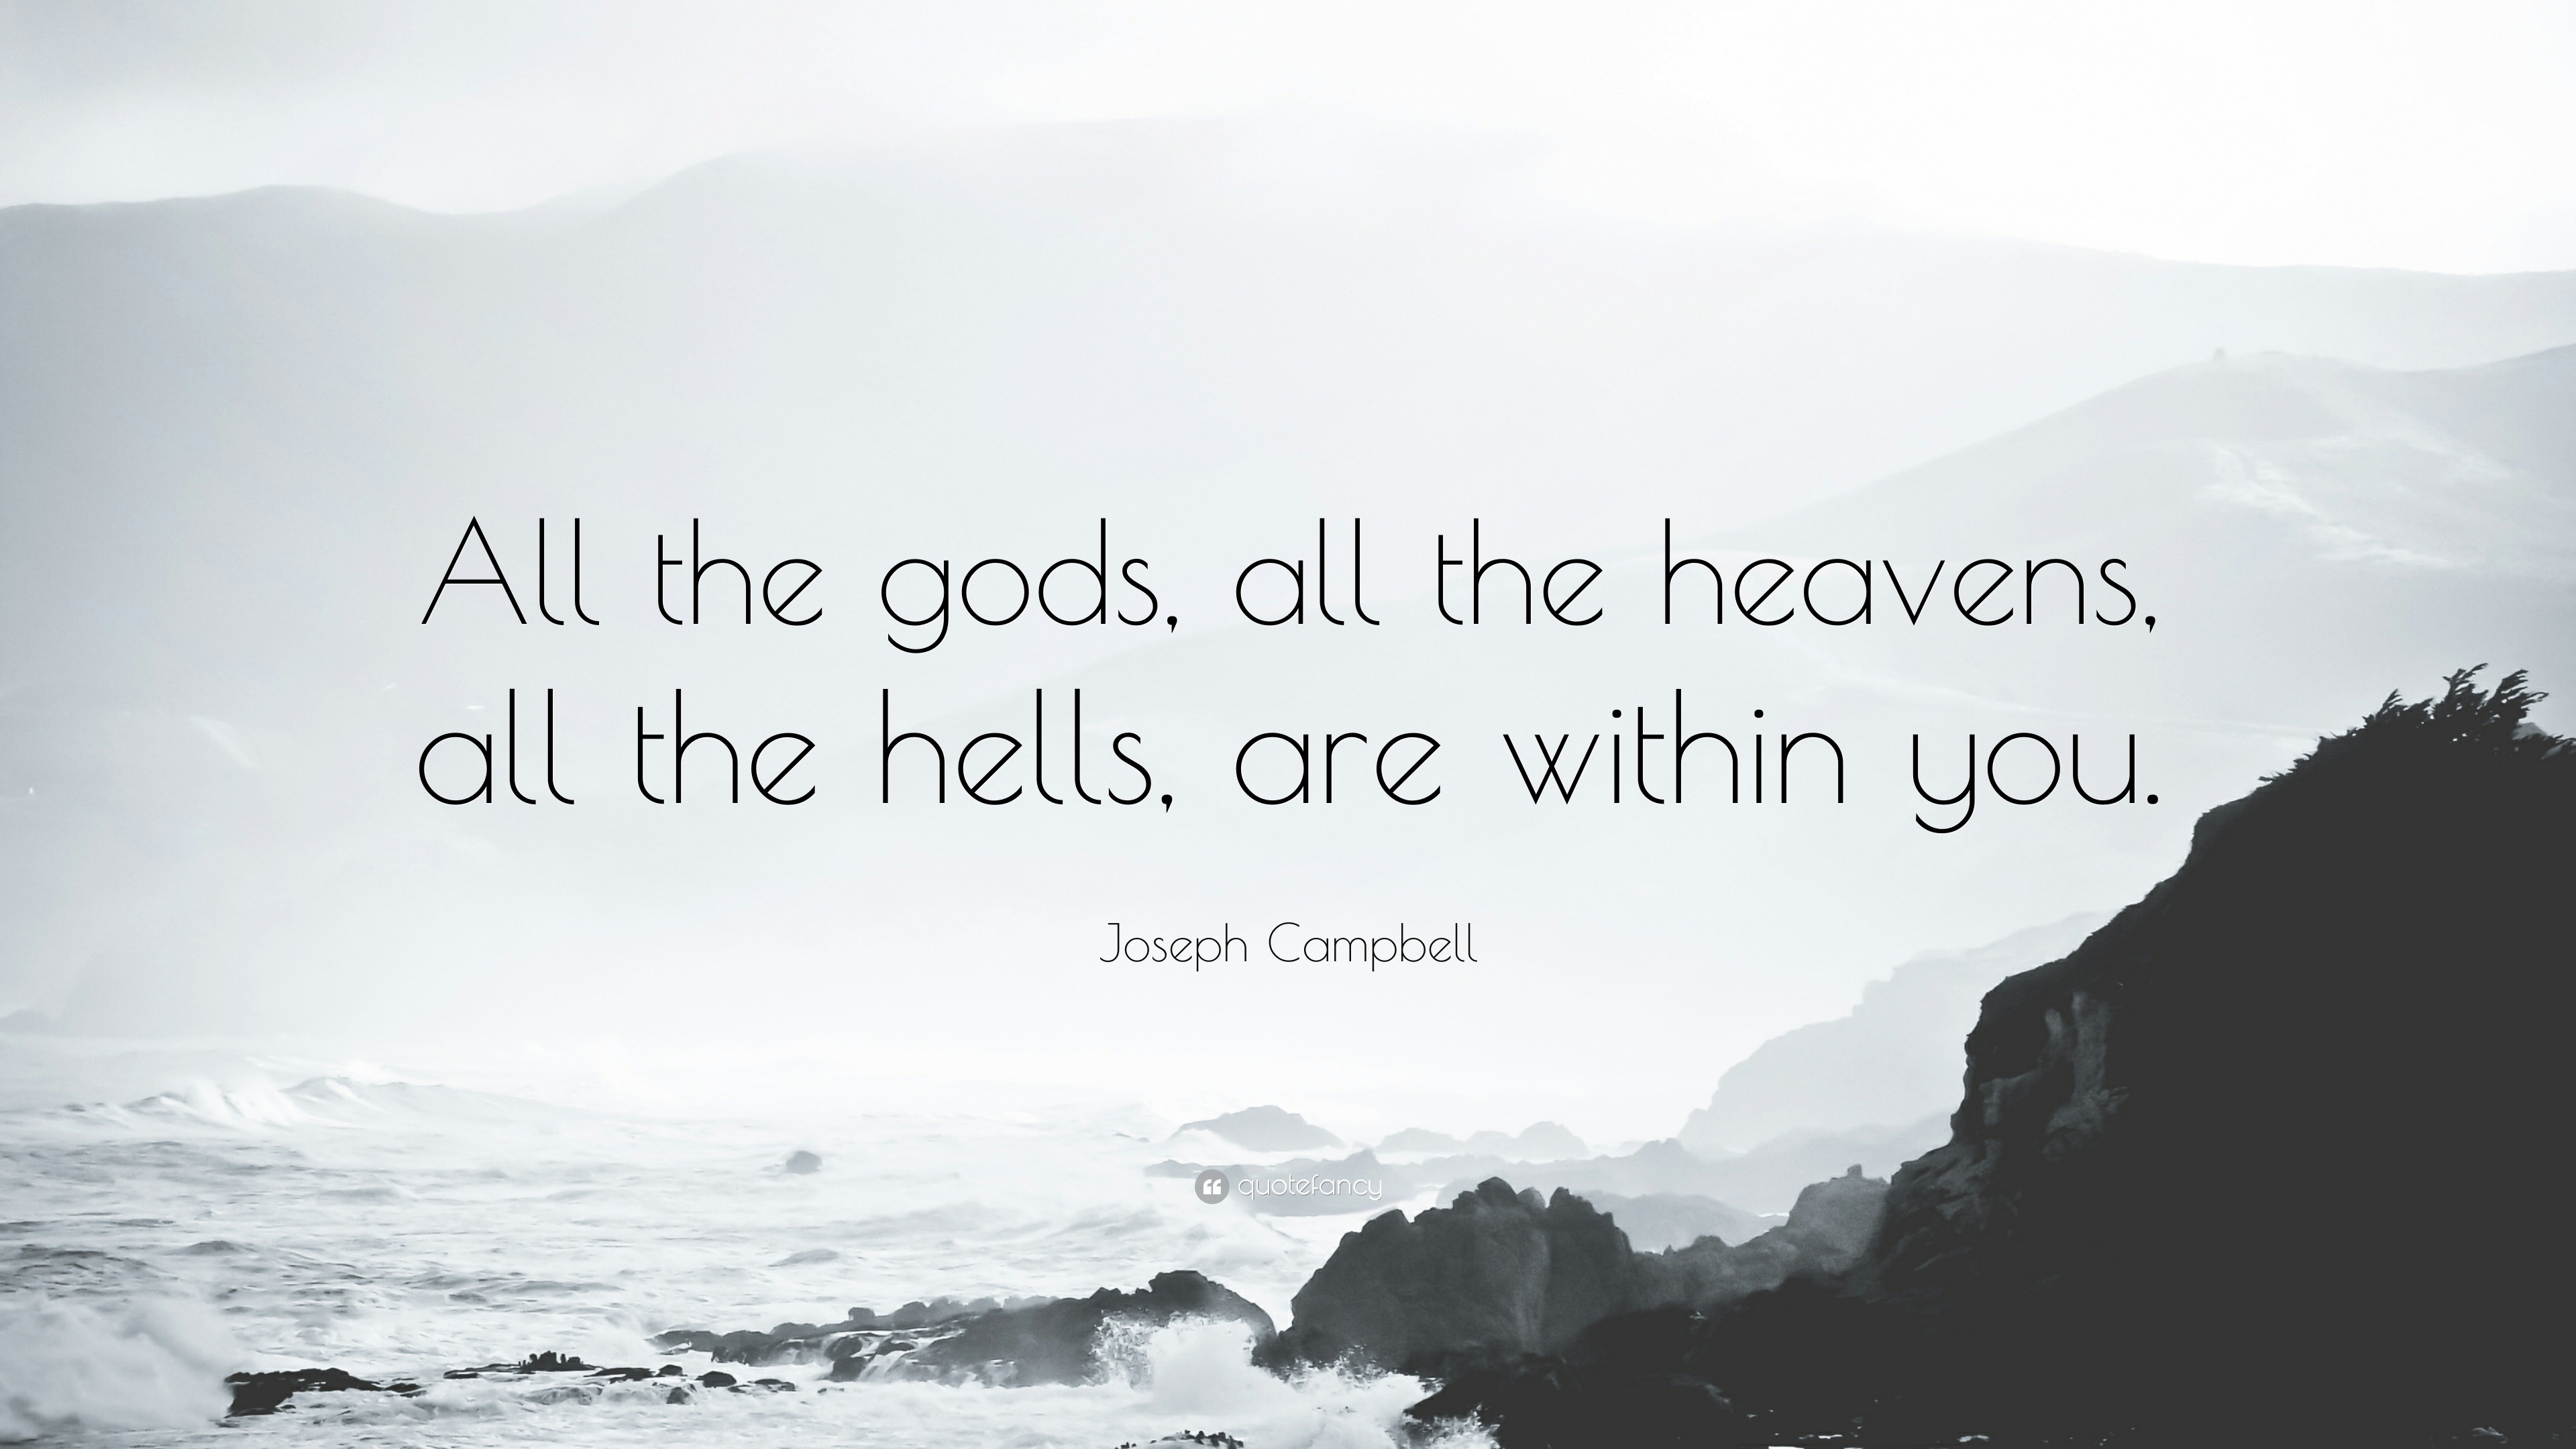 208293 Joseph Campbell Quote All the gods all the heavens all the hells